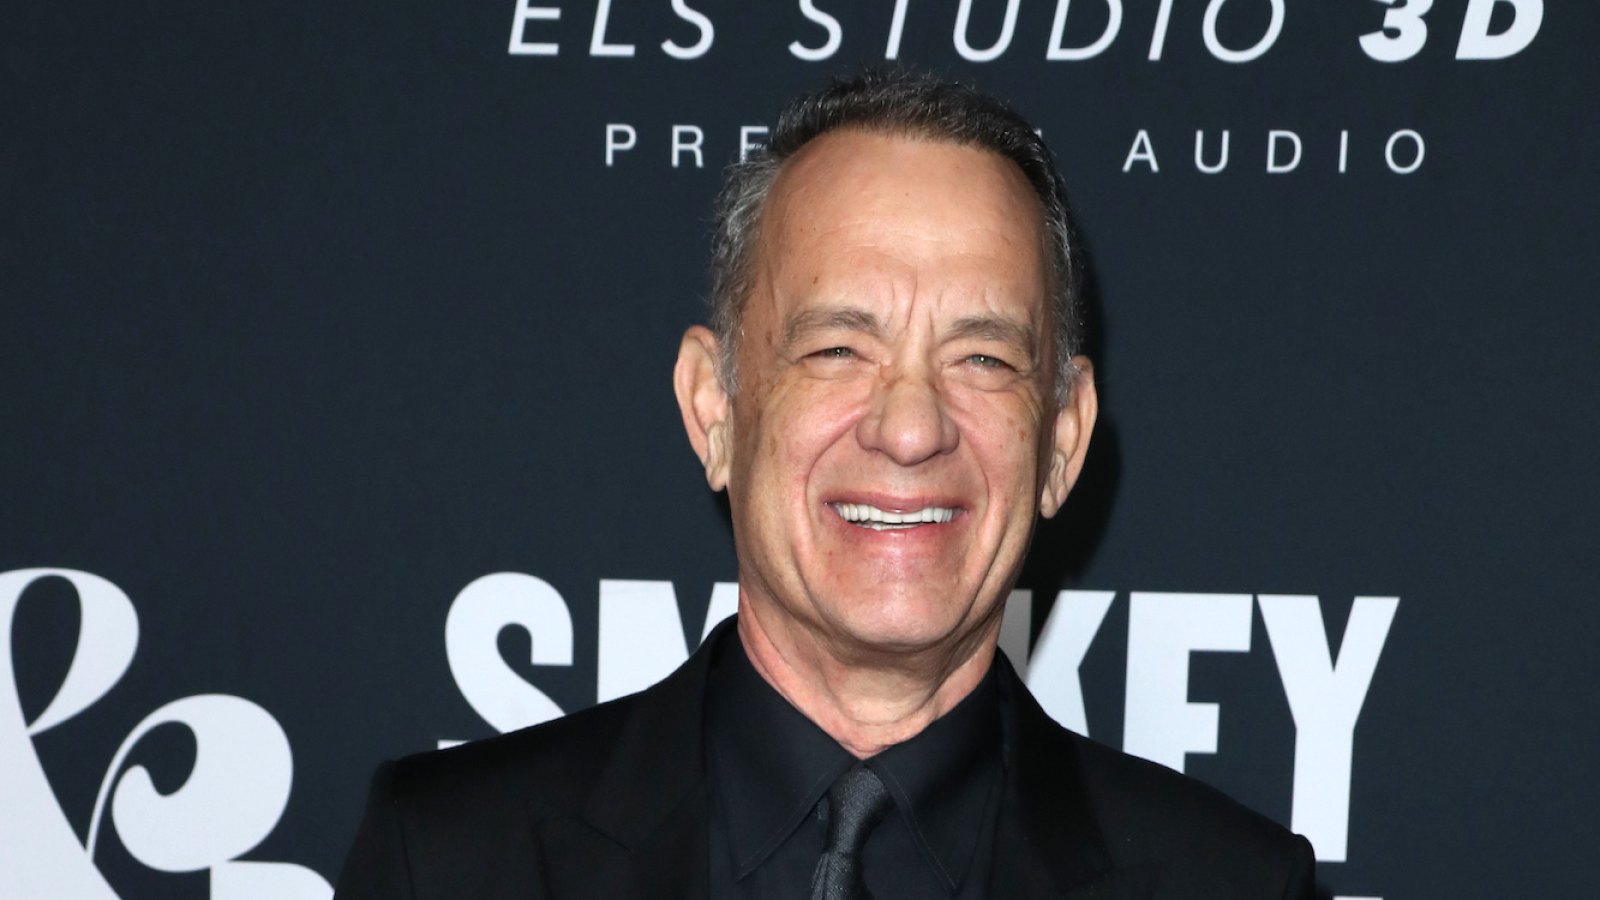 Tom Hanks Thinks He Could Star in Movies Posthumously With AI Technology